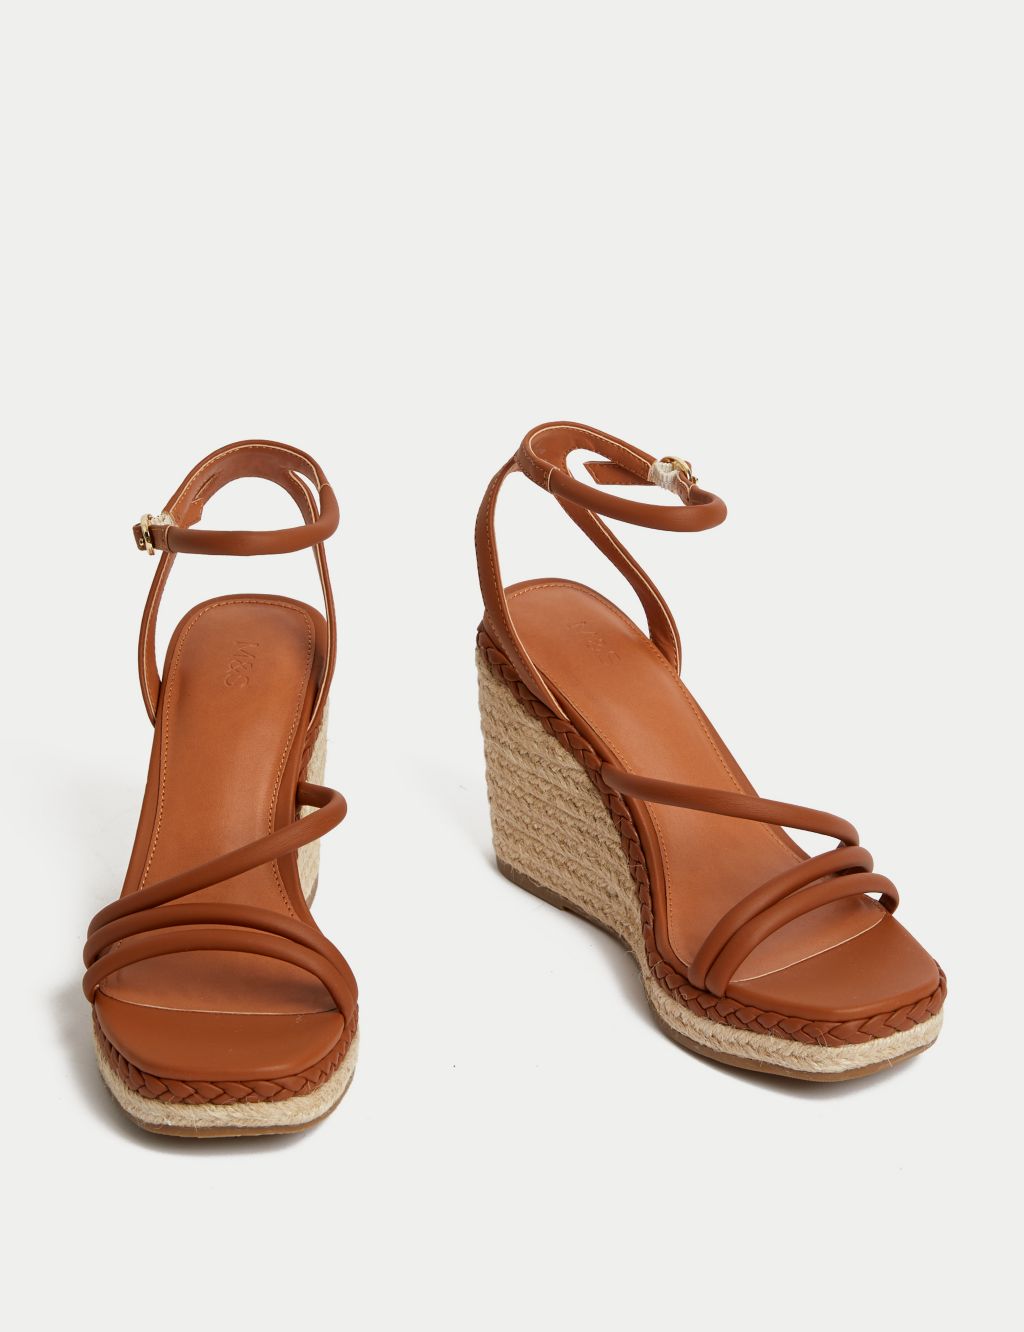 Buckle Strappy Wedge Espadrilles 1 of 3